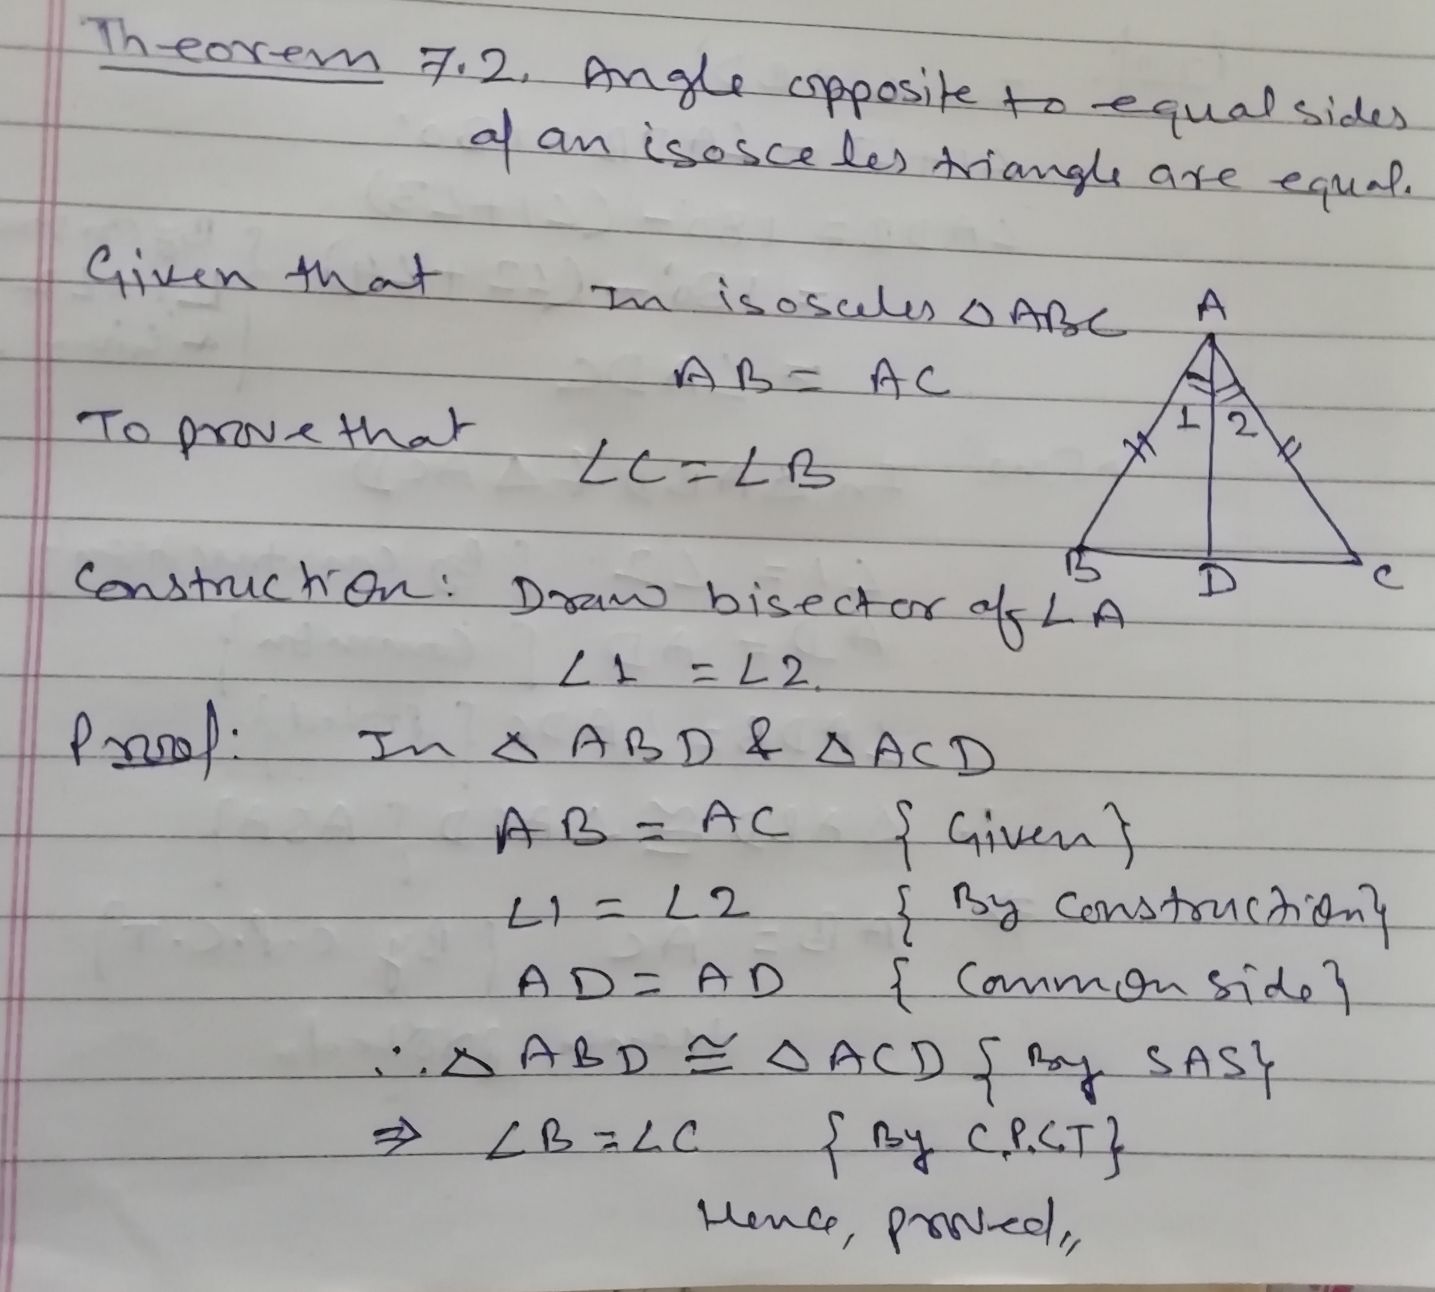 NCERT Solutions Class 9 Maths Chapter 7 Exercise 7.2 Triangles - Free PDF